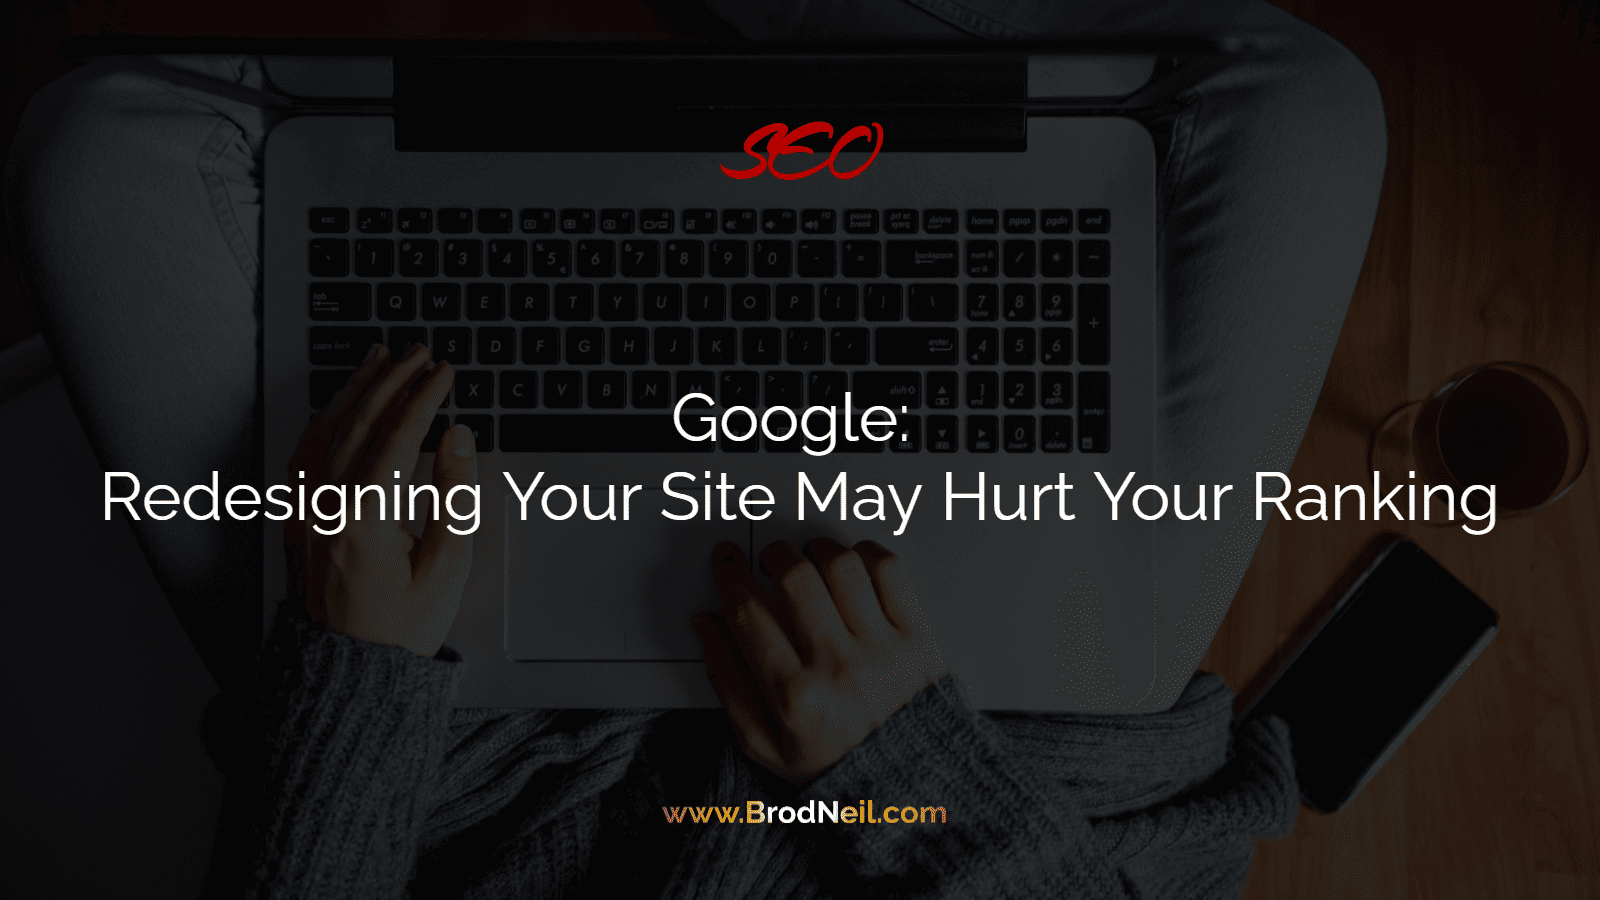 Google: Redesigning Your Site May Hurt Your Ranking